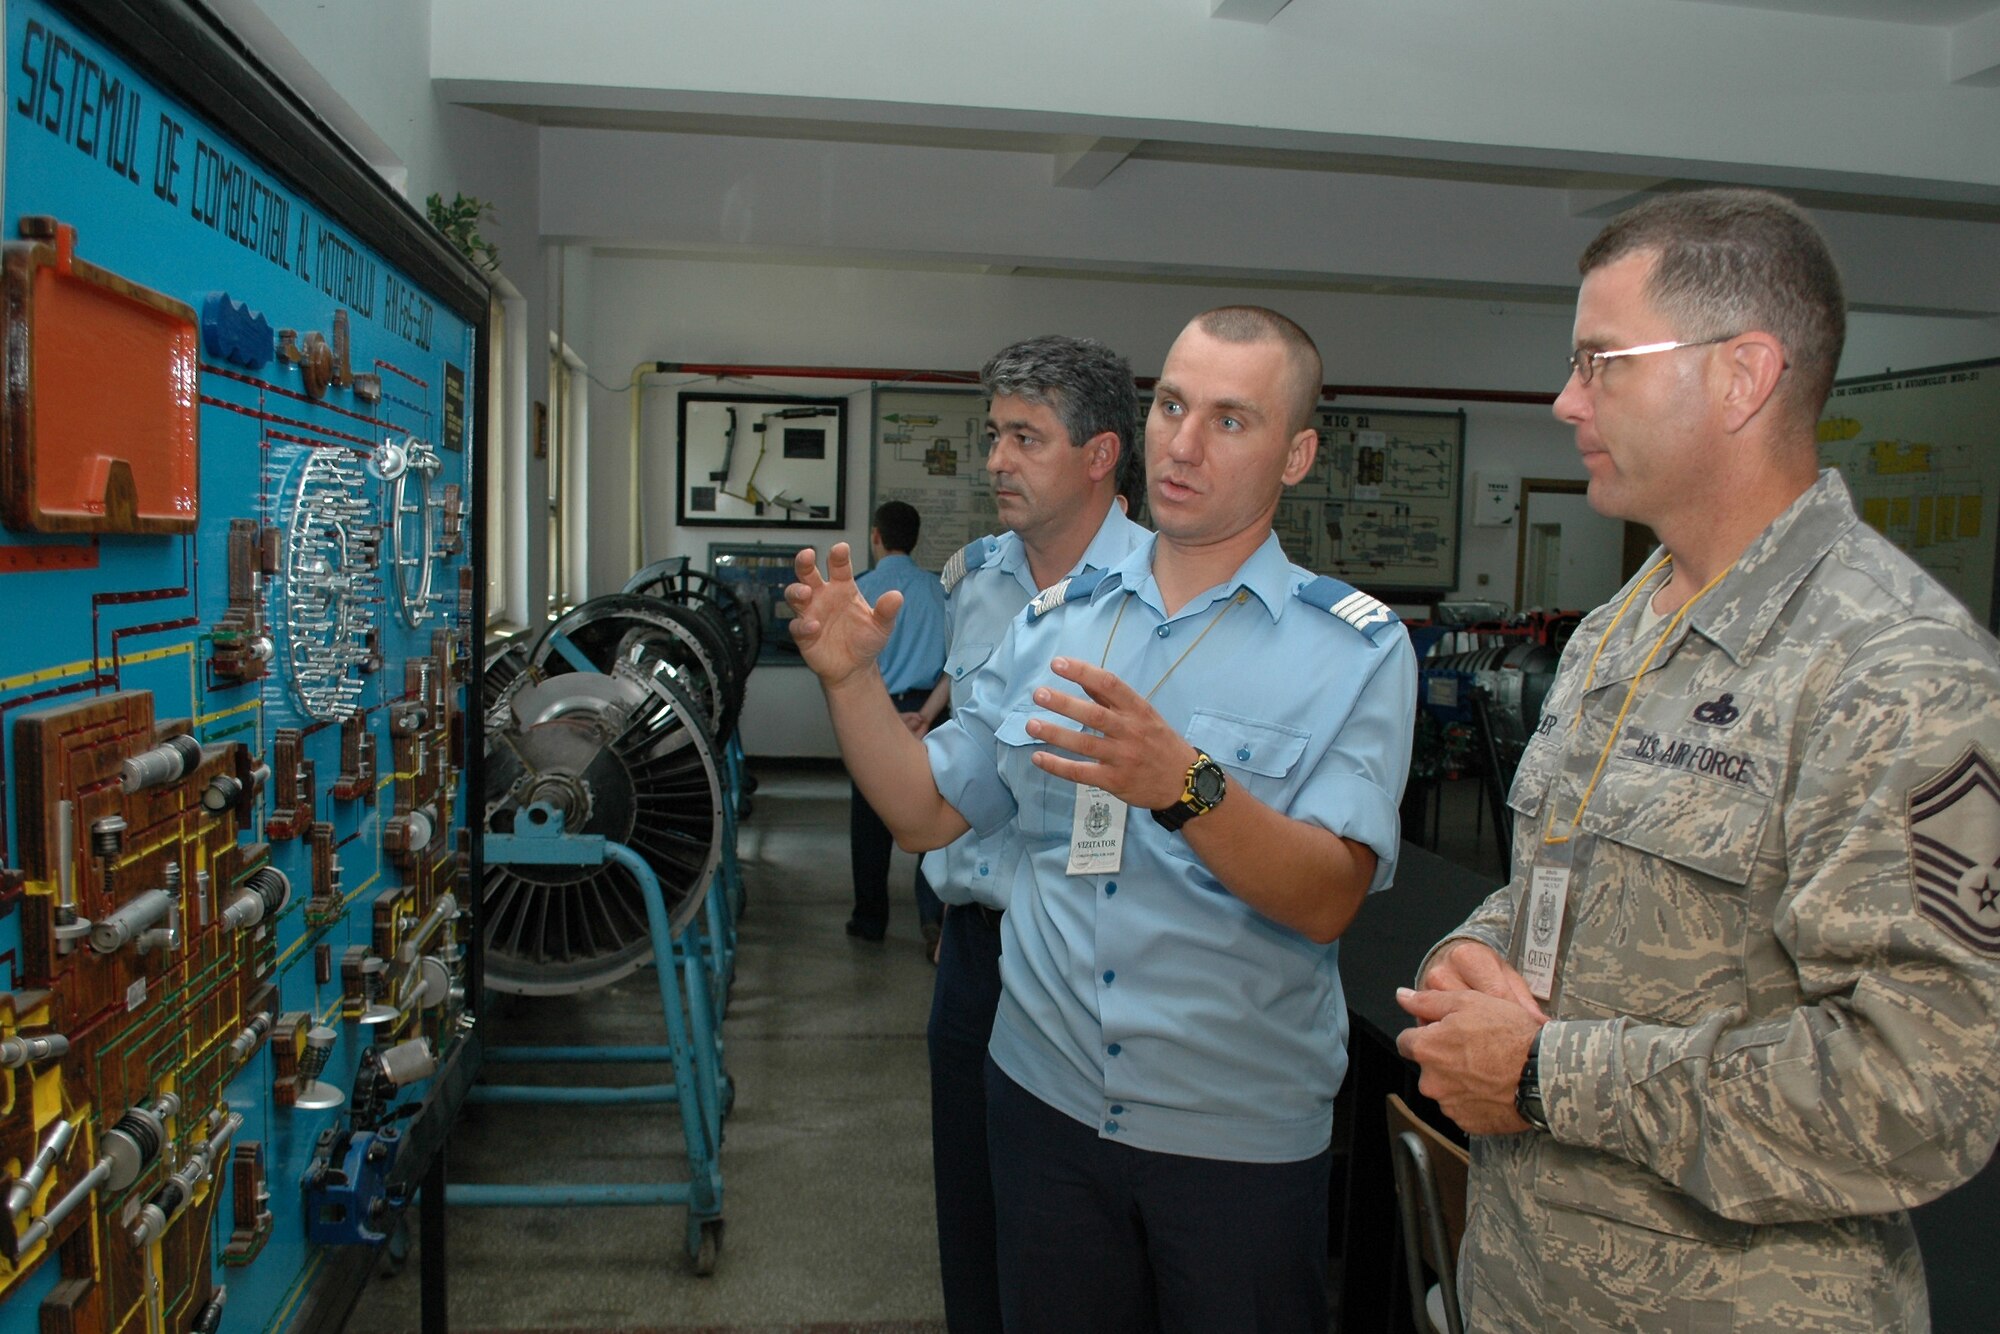 Romanian Air Force Warrant Officer Second Class Dima Valentin, (middle), a MiG-21 Lancer electrician by trade, discusses an aircraft maintenance diagram Aug. 25, 2009, with Senior Master Sgt. Timothy Kellner, 31st Maintenance Group quality assurance superintendent.  Sergeant Kellner’s visit to the Traian Vuia Air Force Warrant Officer and NCO Military School in Boboc, Romania, is part of a three-person U.S. Air Forces in Europe Maintenance NCO Training Program Traveling Contact Team who met with RoAF aircraft maintainers and WO and NCO school instructors Aug. 25-28.  (U.S. Air Force photo/Tech. Sgt. Michael O’Connor)